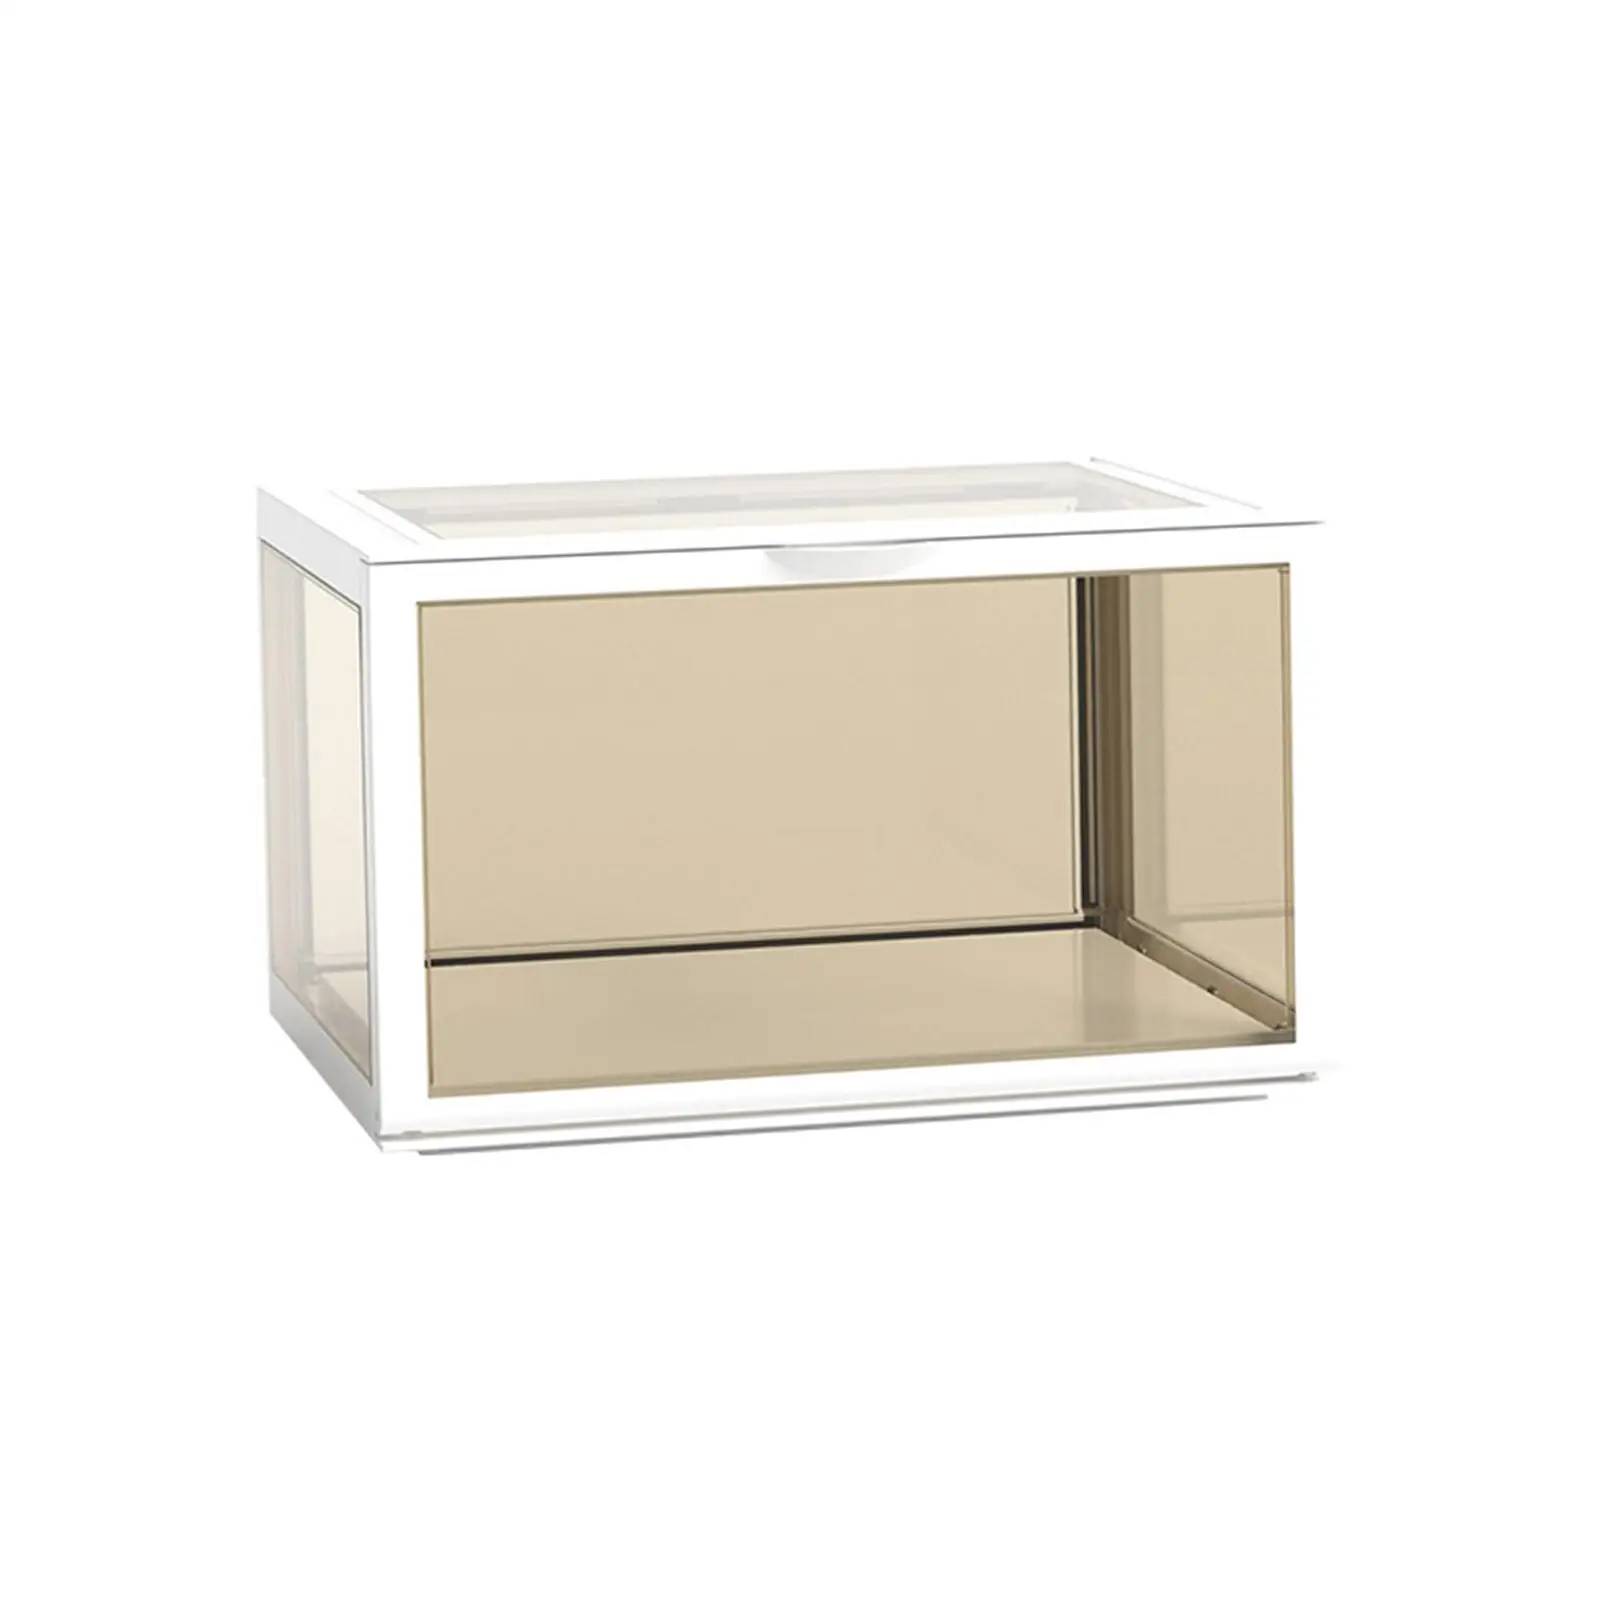 Clear Acrylic Display Case Handicrafts Storage Shelf Display Storage Box Car Model Rack for Souvenirs Collectibles Cosmetics